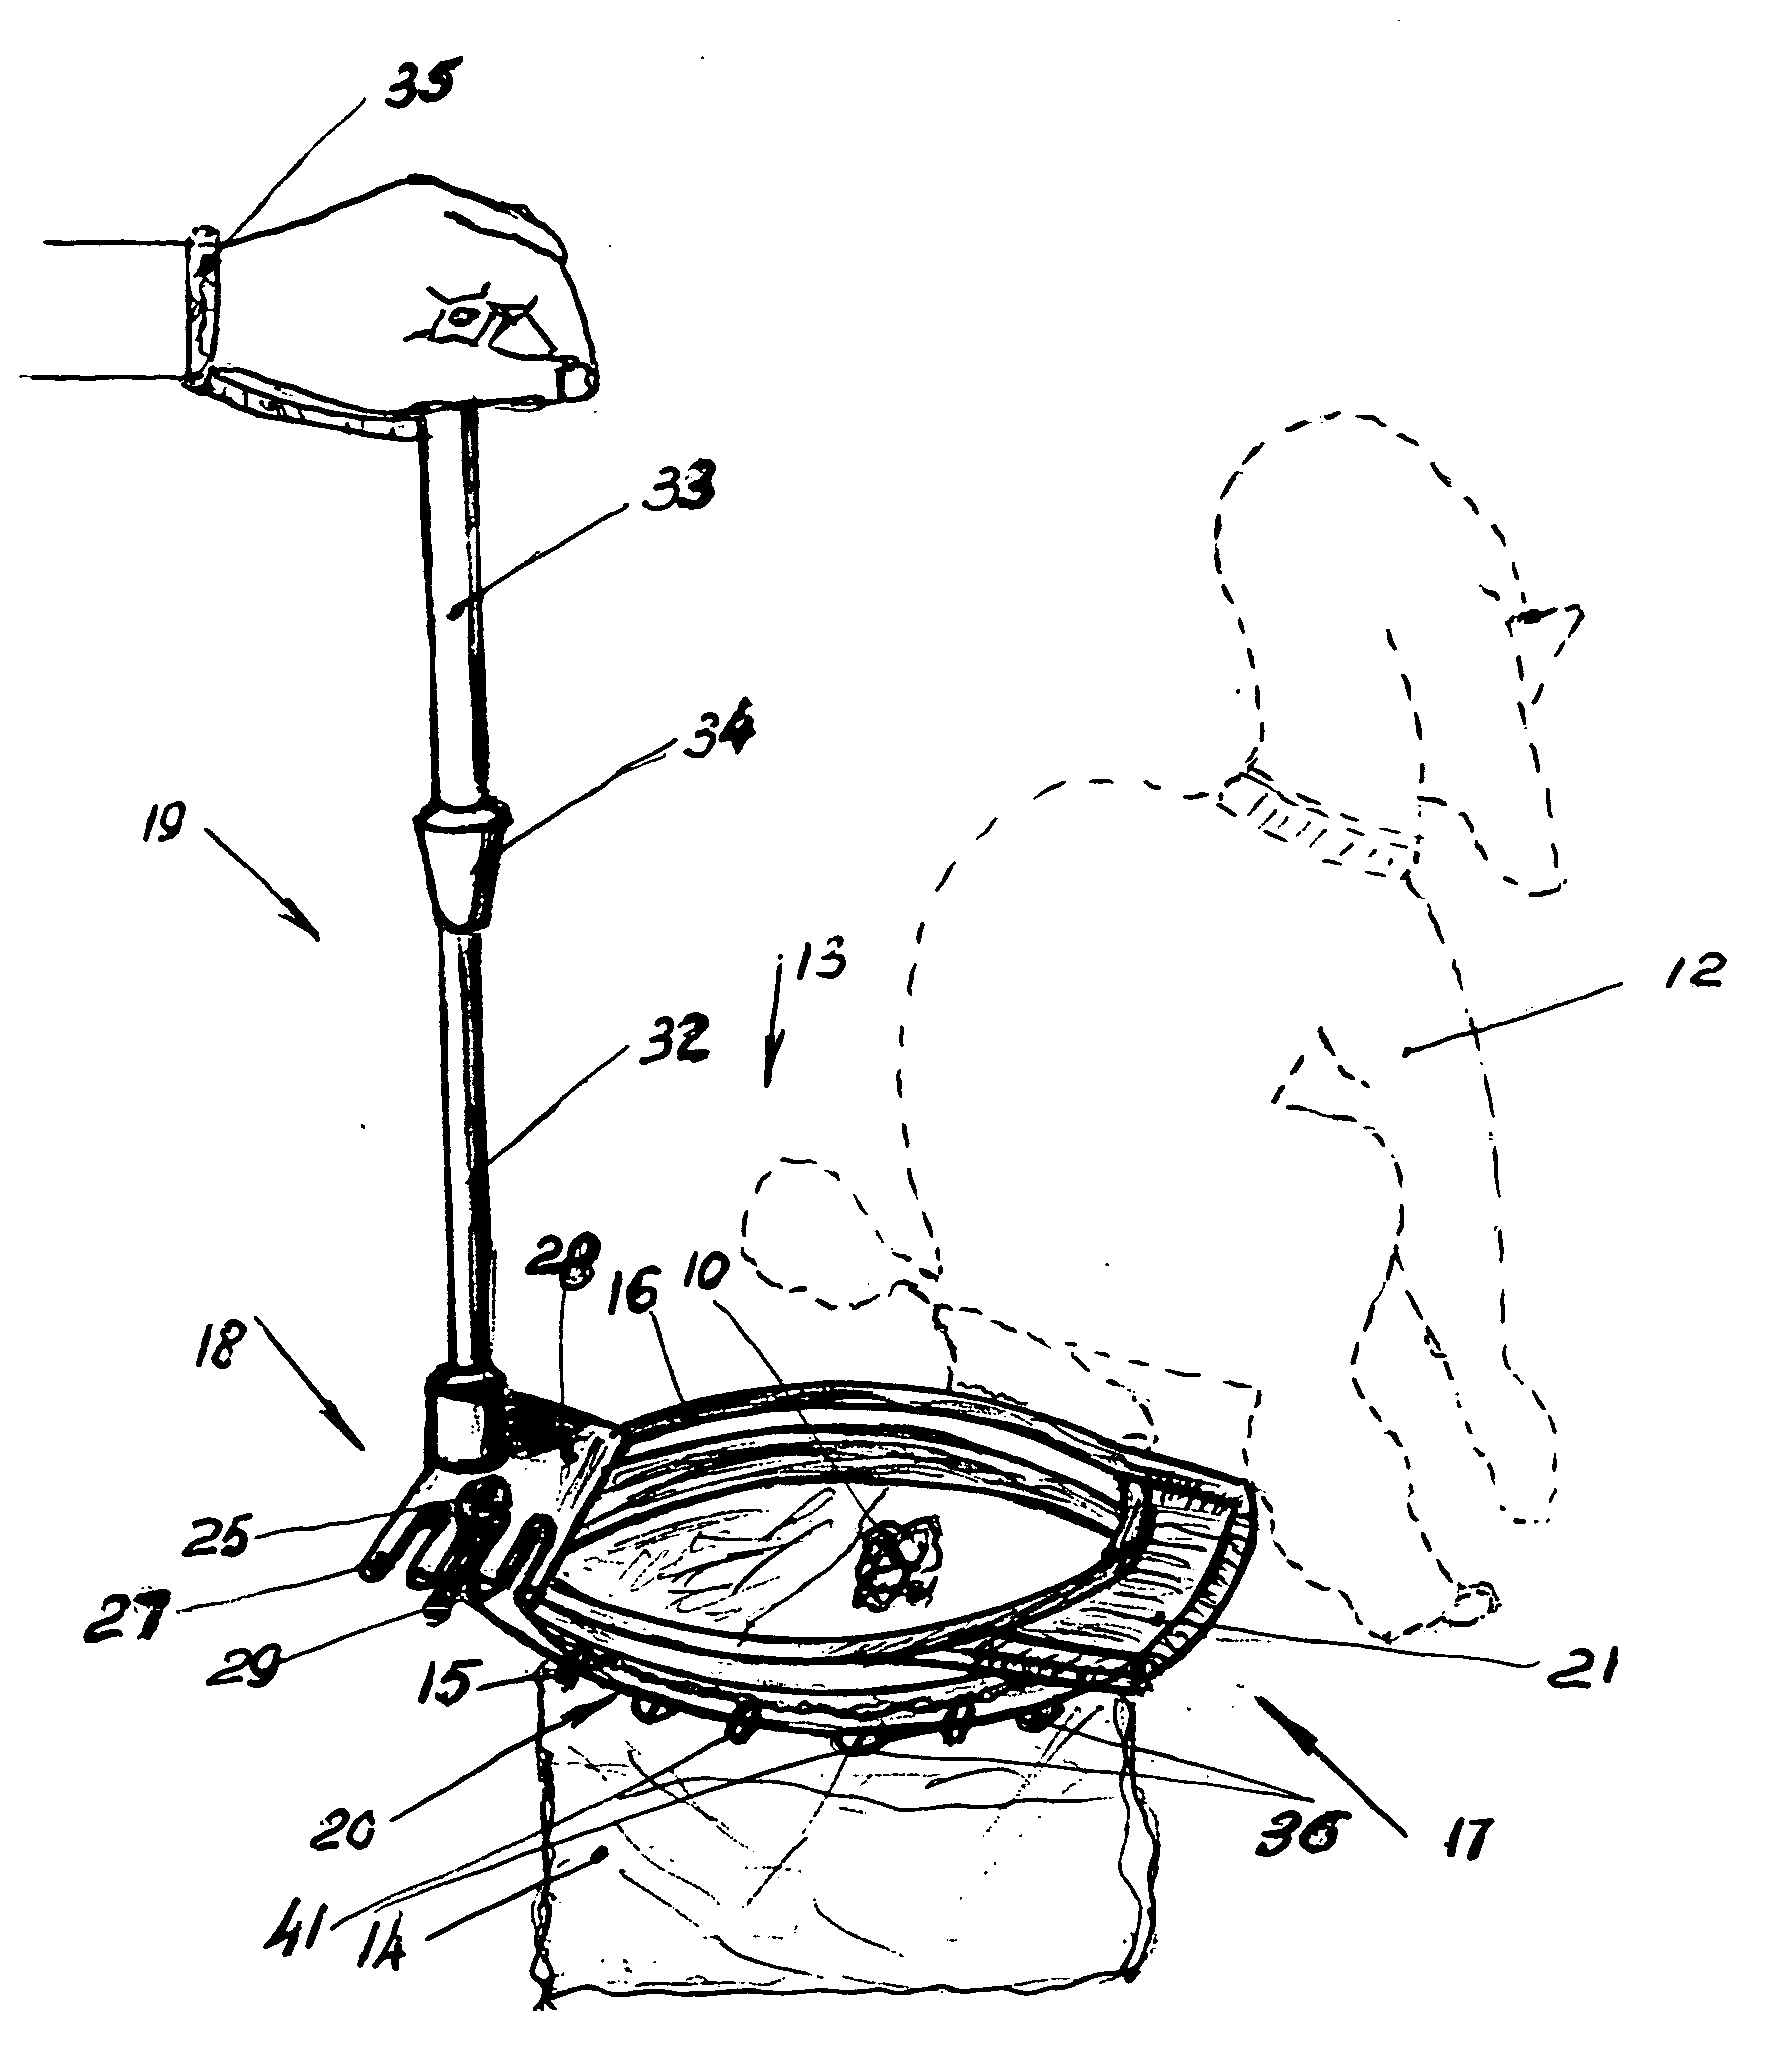 Sanitation device for collecting and disposing of animal droppings